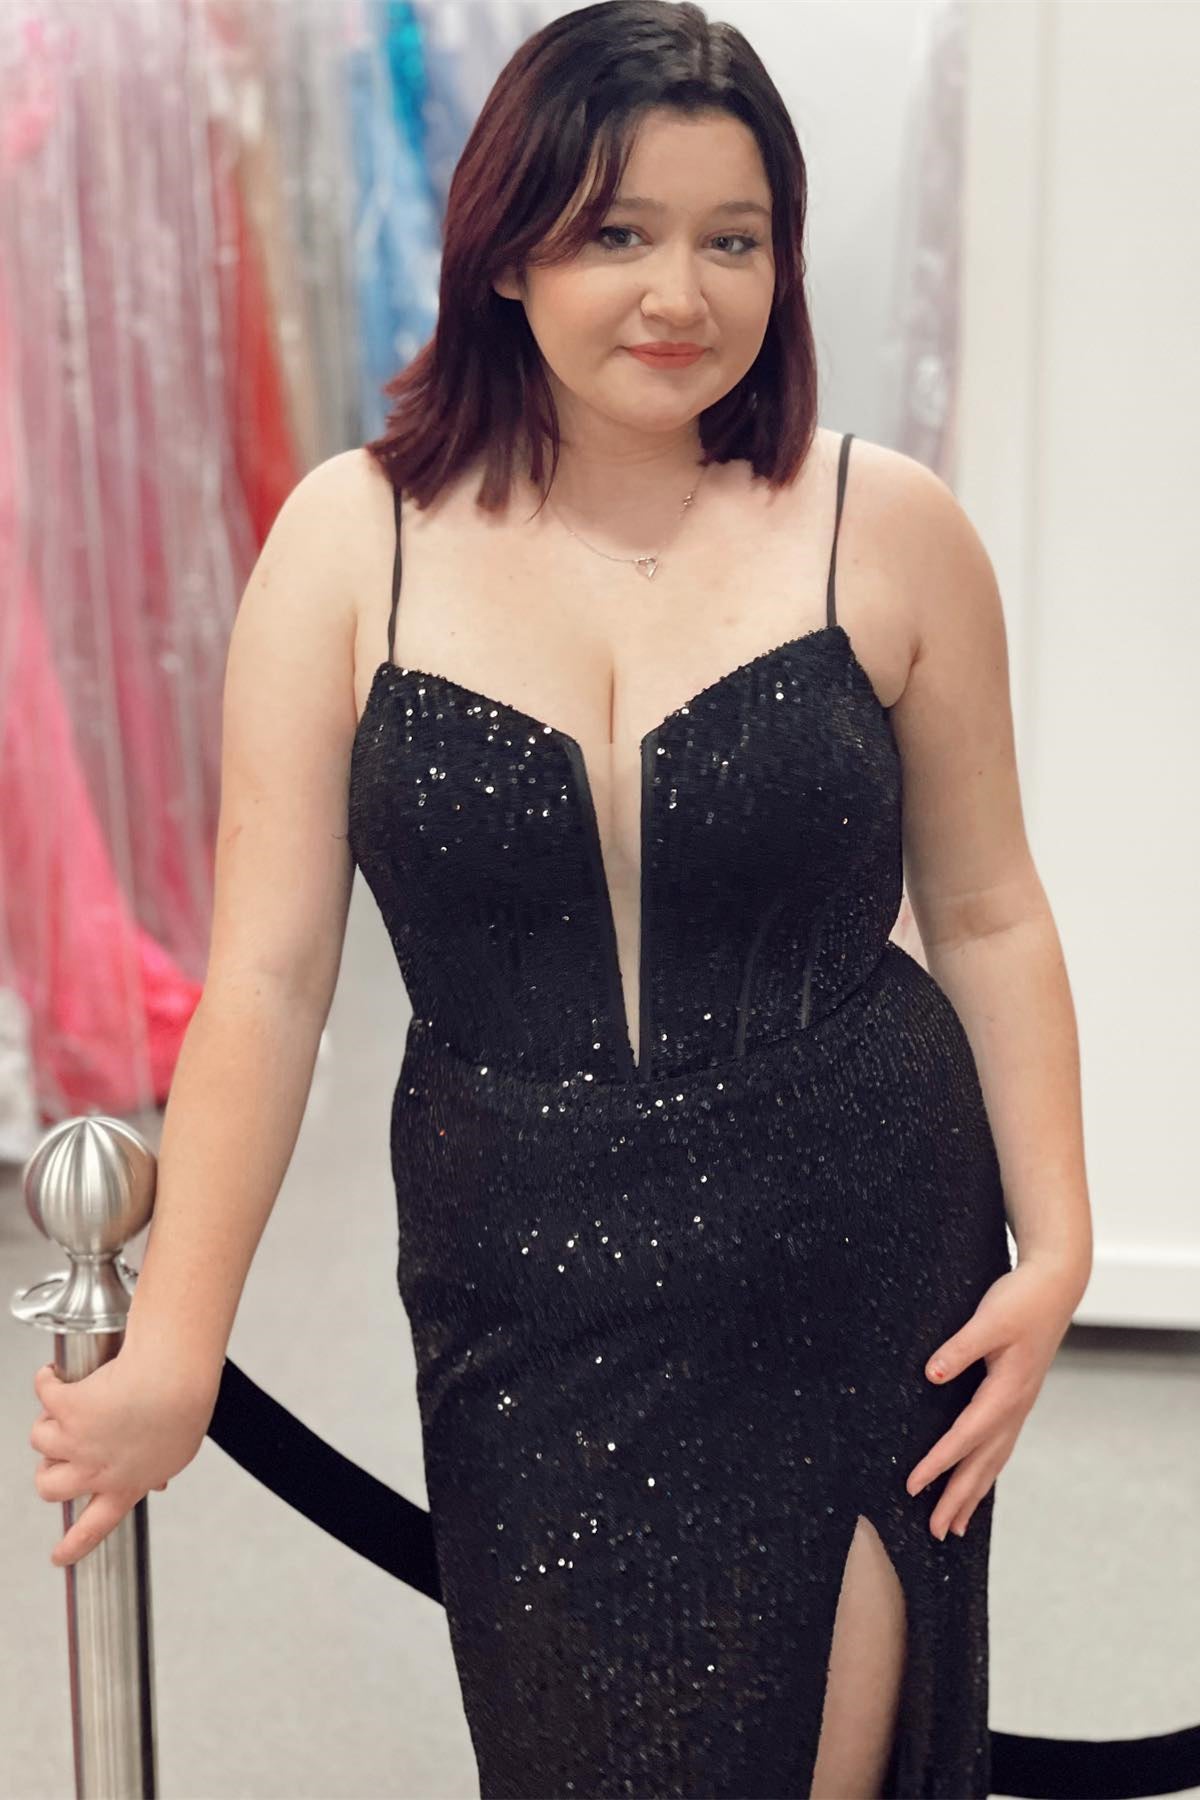 Black prom dress with mesh cleavage cover